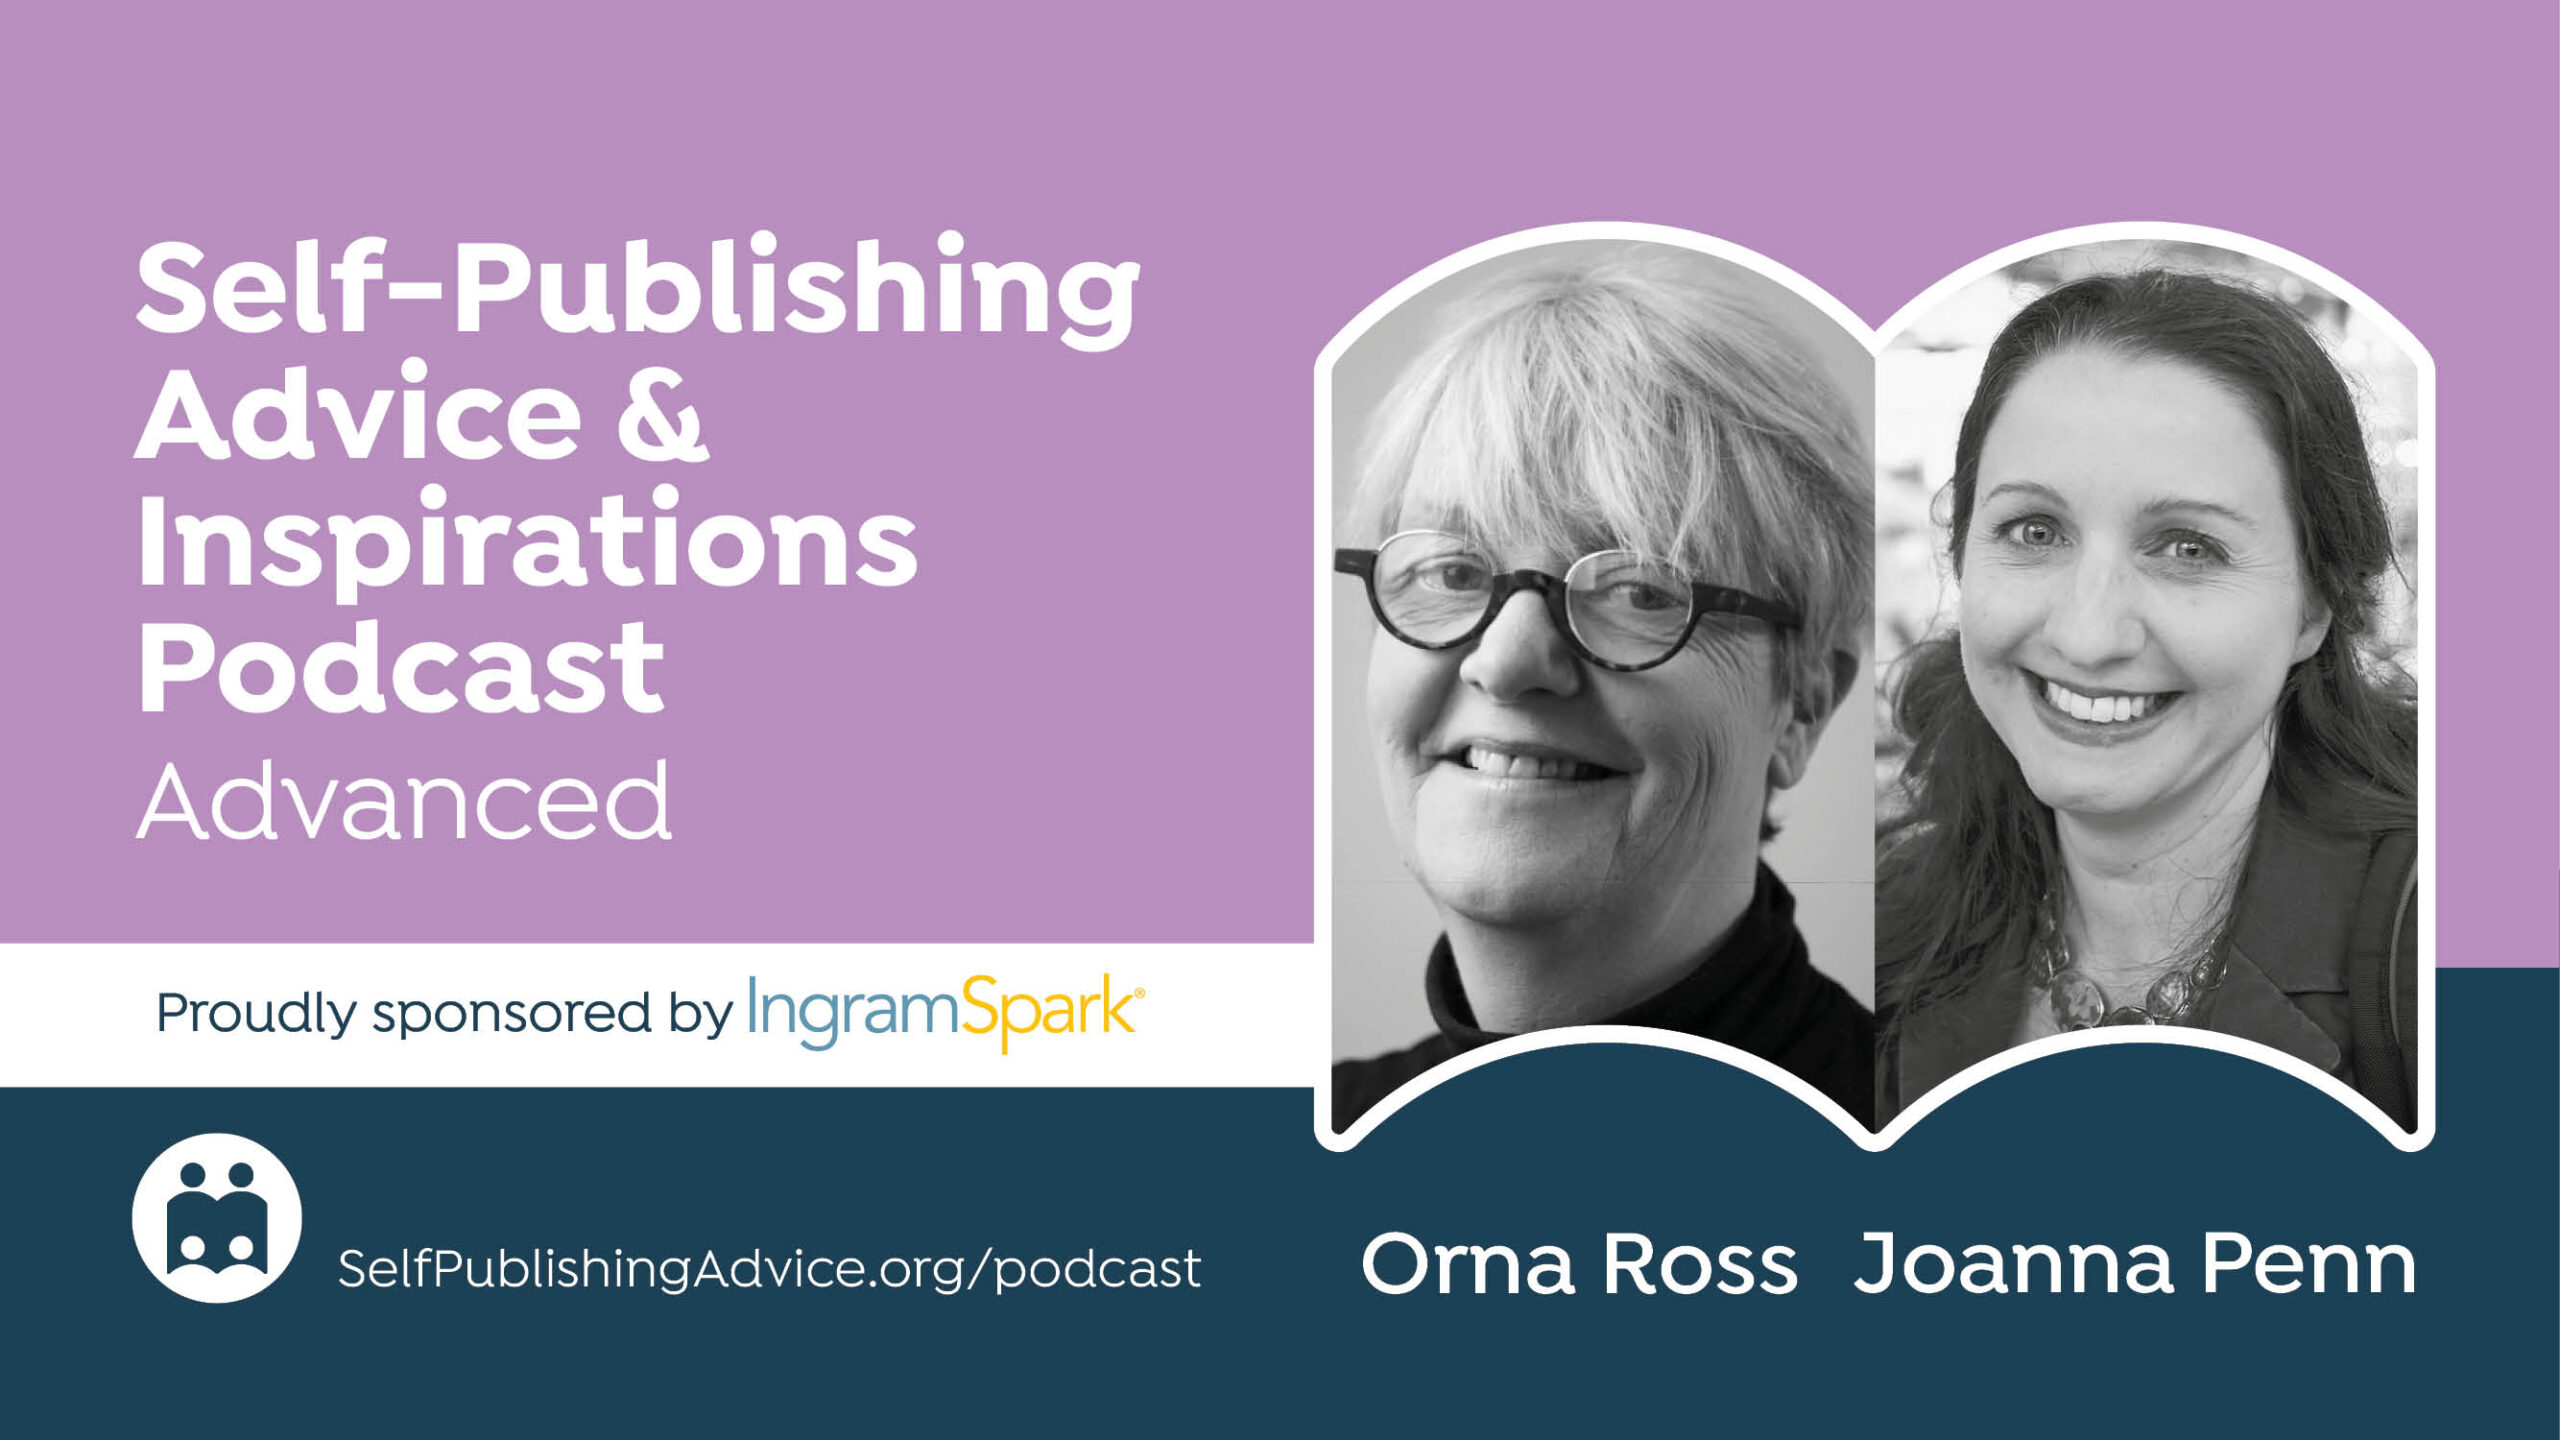 AI For Authors Update: Advanced Self-Publishing Podcast With Orna Ross And Joanna Penn